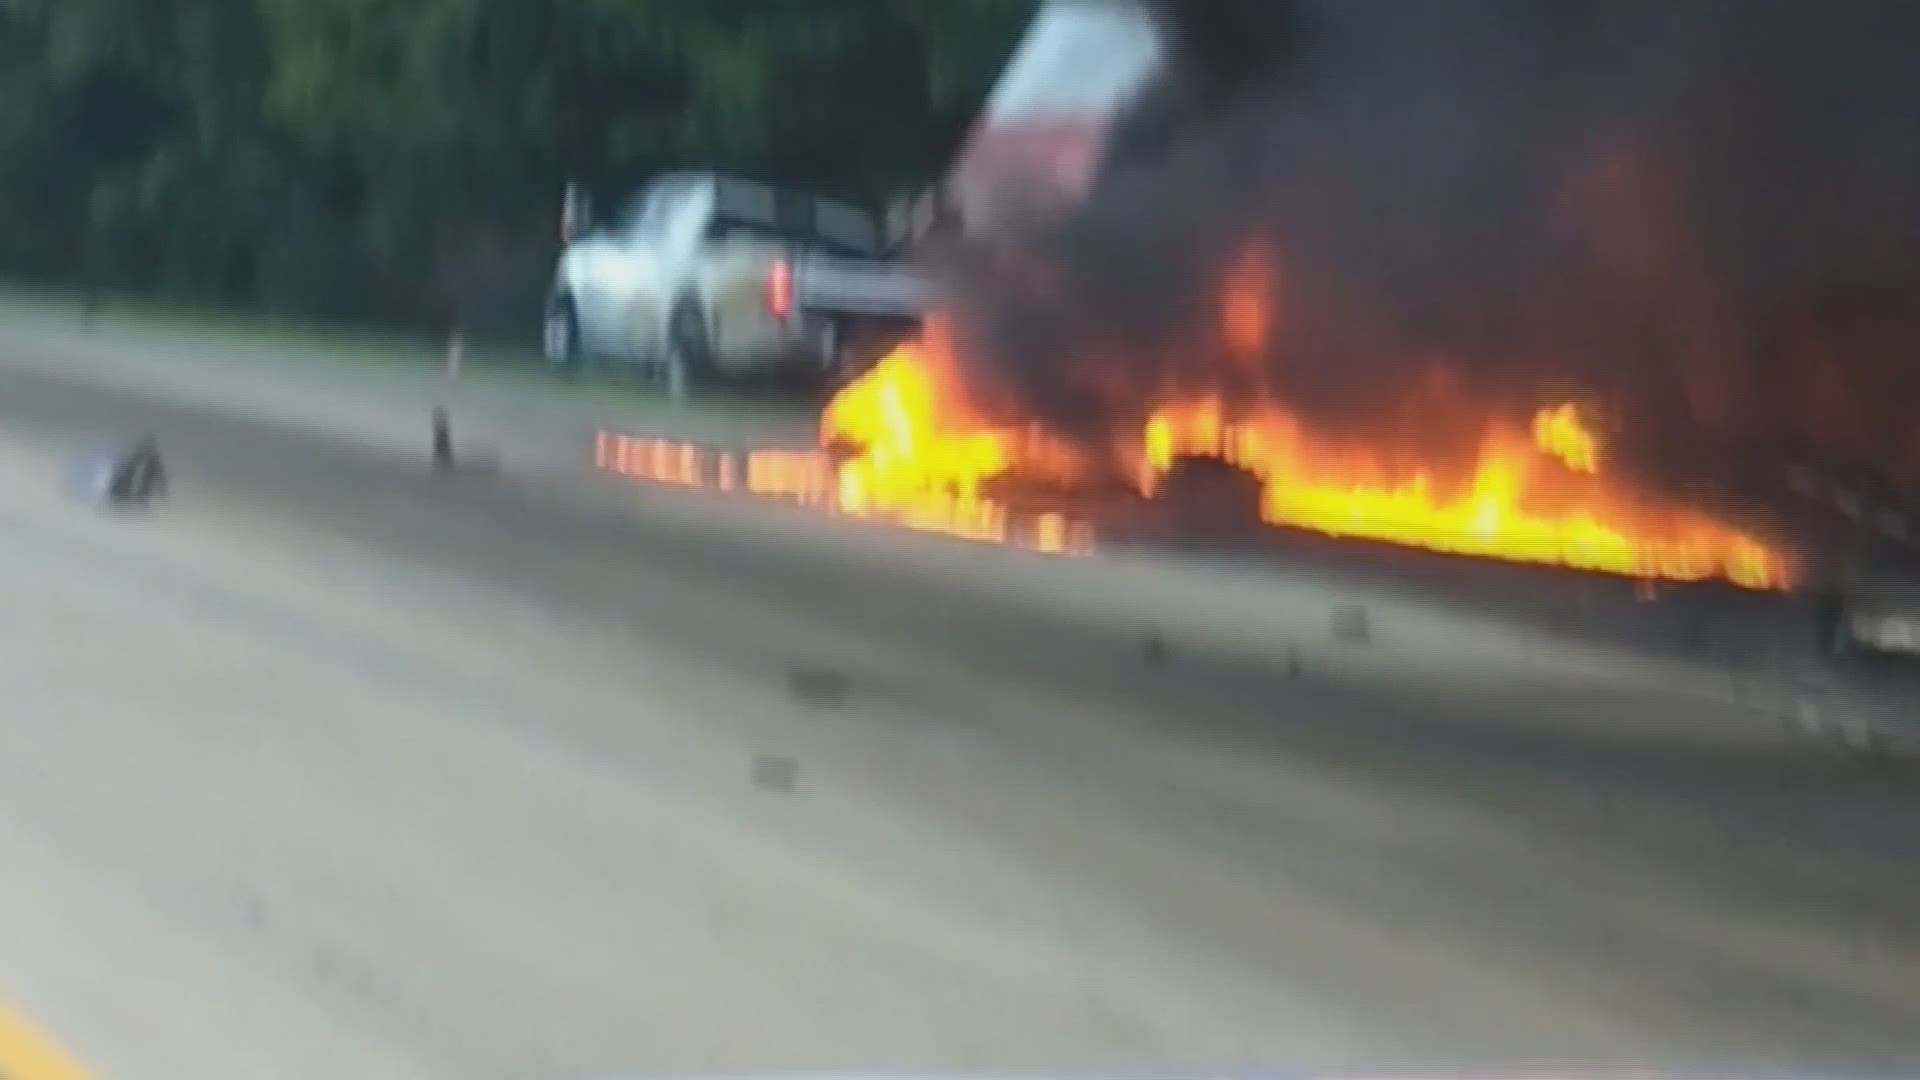 Vehicle fires shut down lane on I-16 in Laurens County